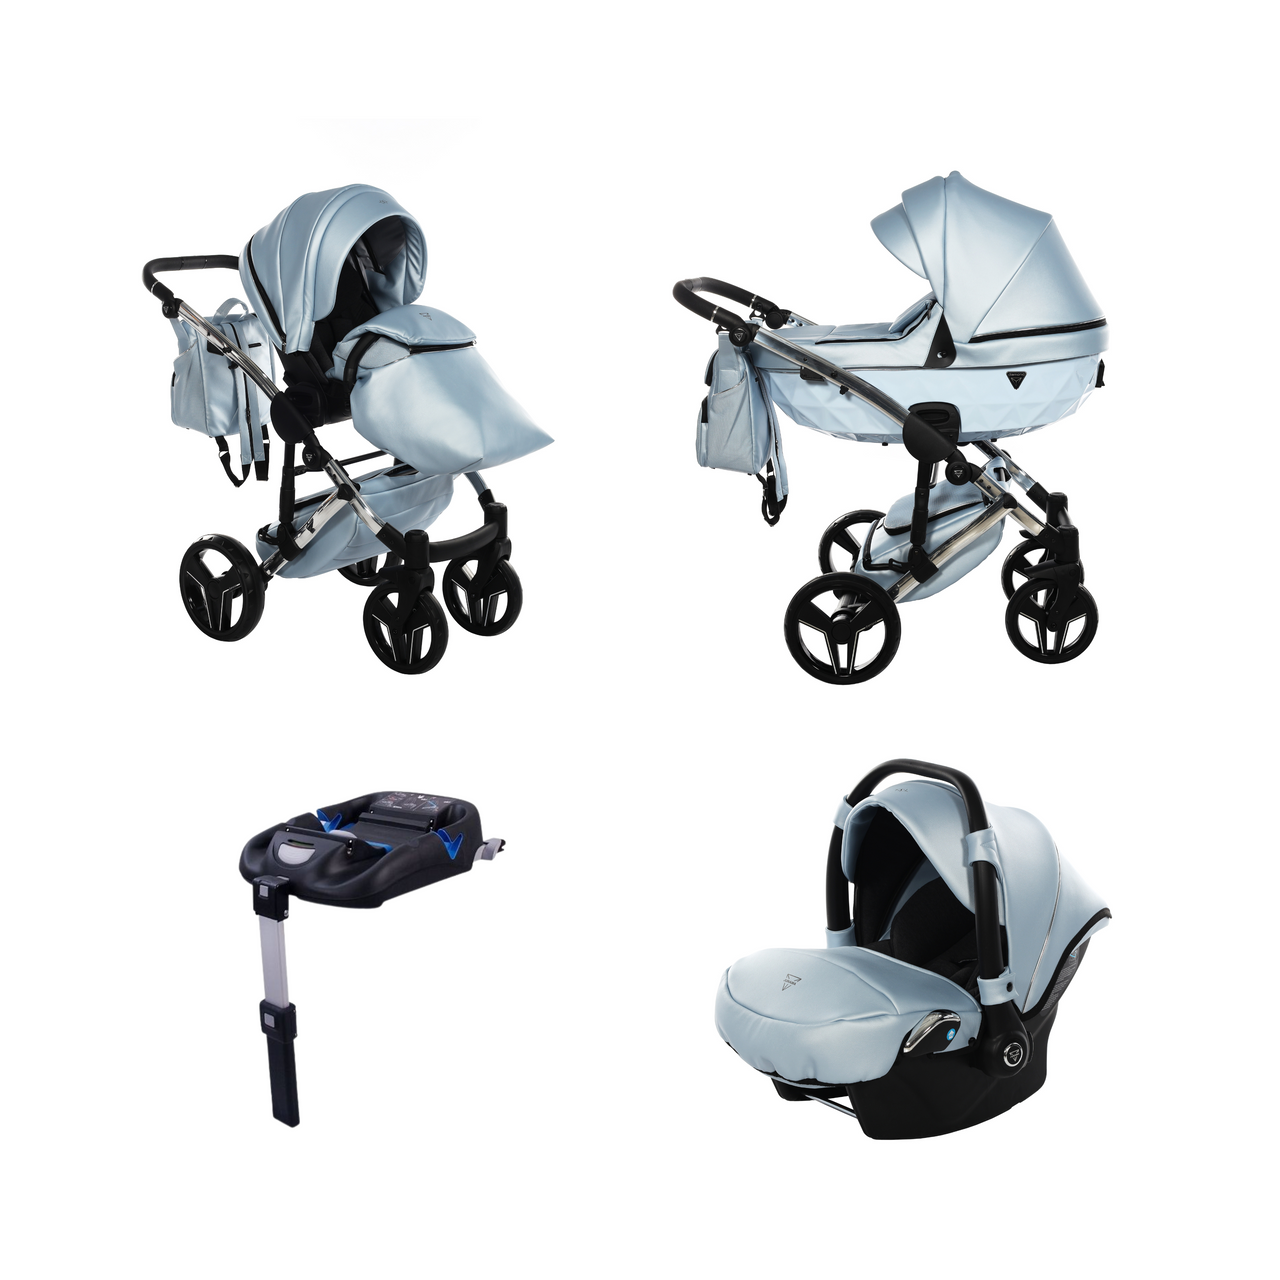 Junama S-Class 3 In 1 Travel System - Sky Blue - For Your Little One